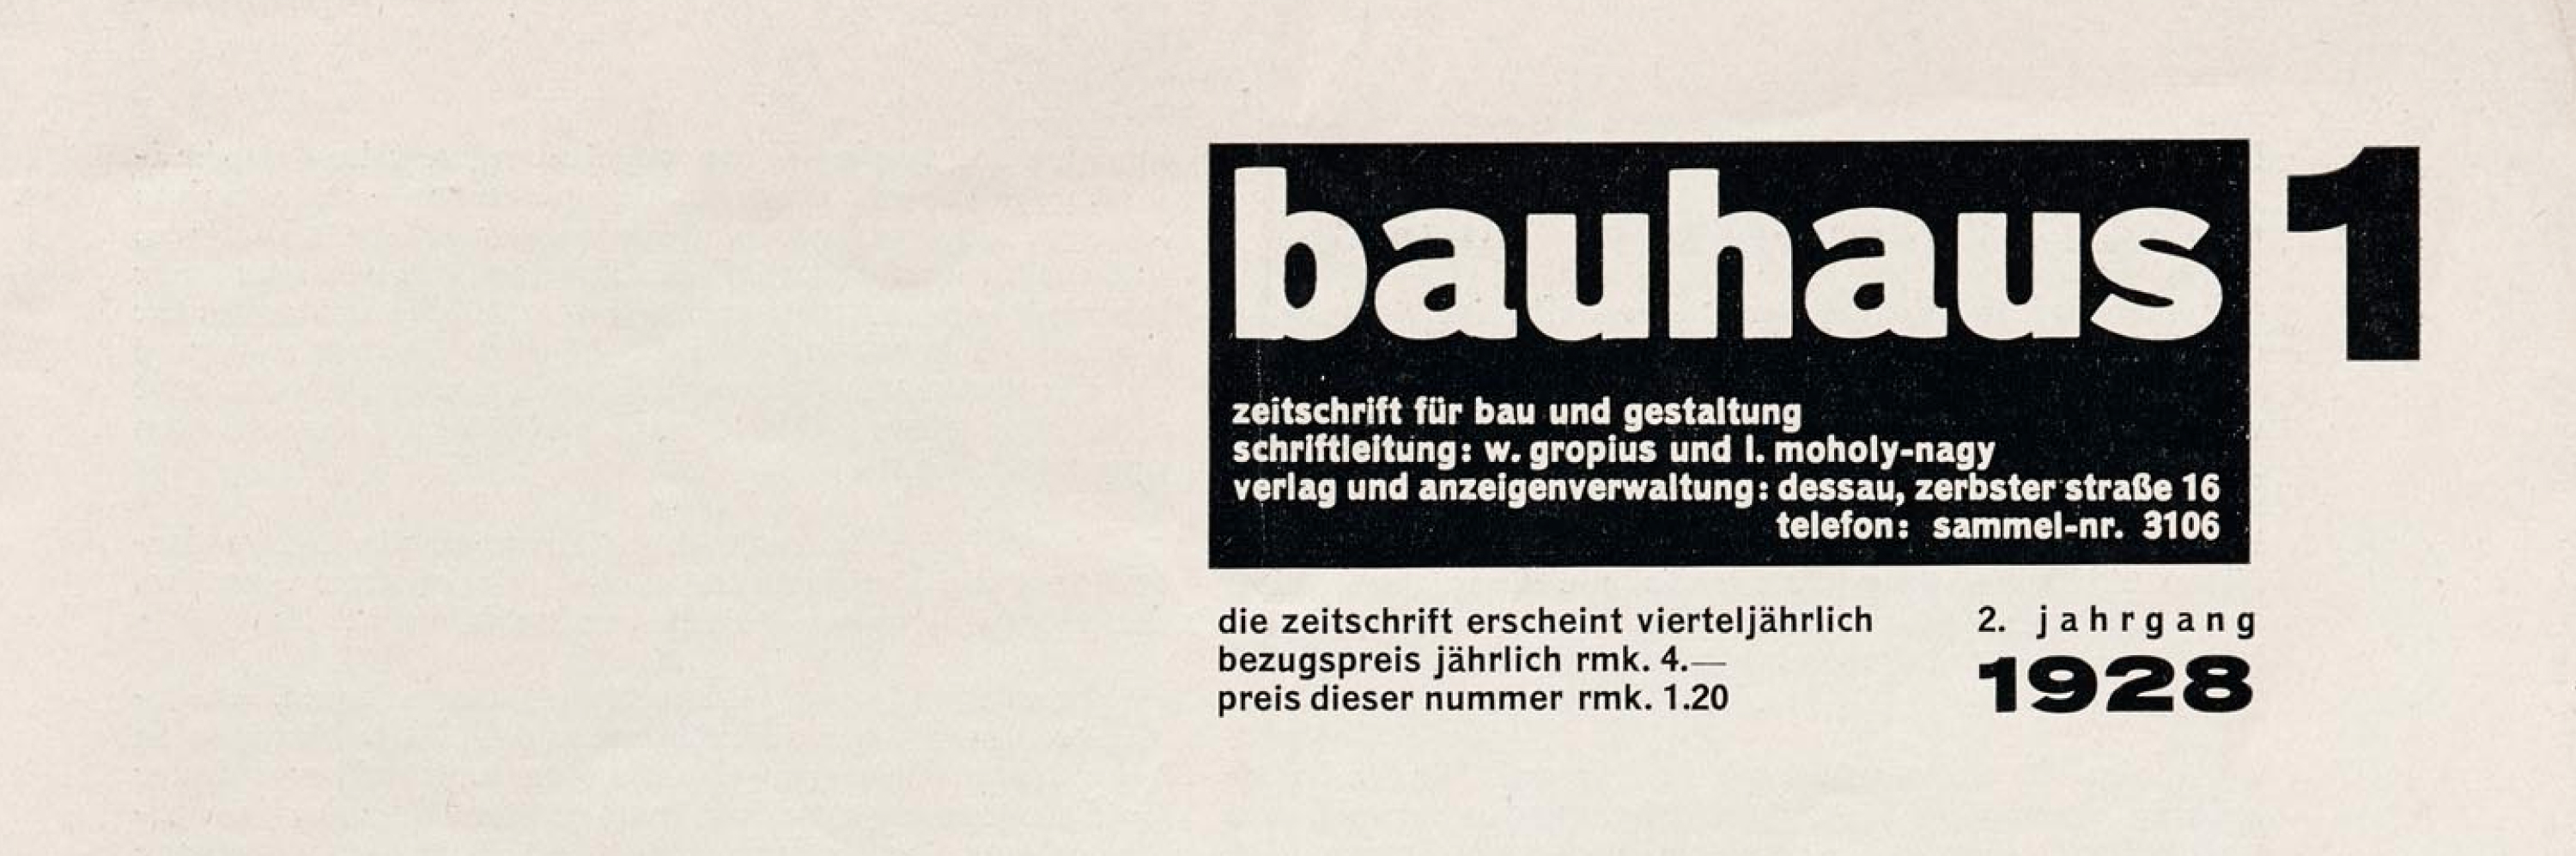 Periodicals as Collections, No. 2: bauhaus - Letterform Archive